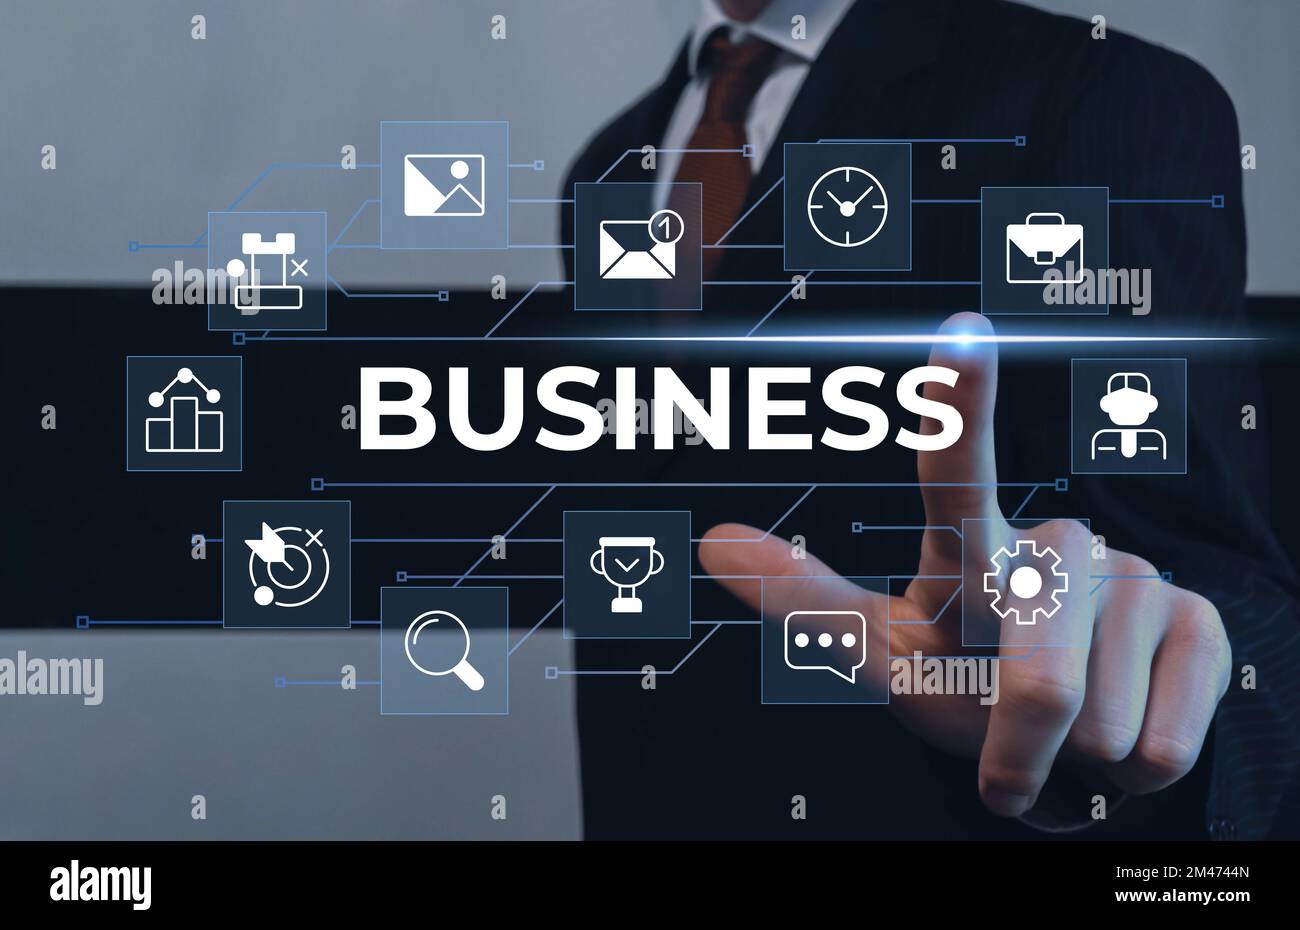 Business closeup concept image with white glyph icons Stock Photo